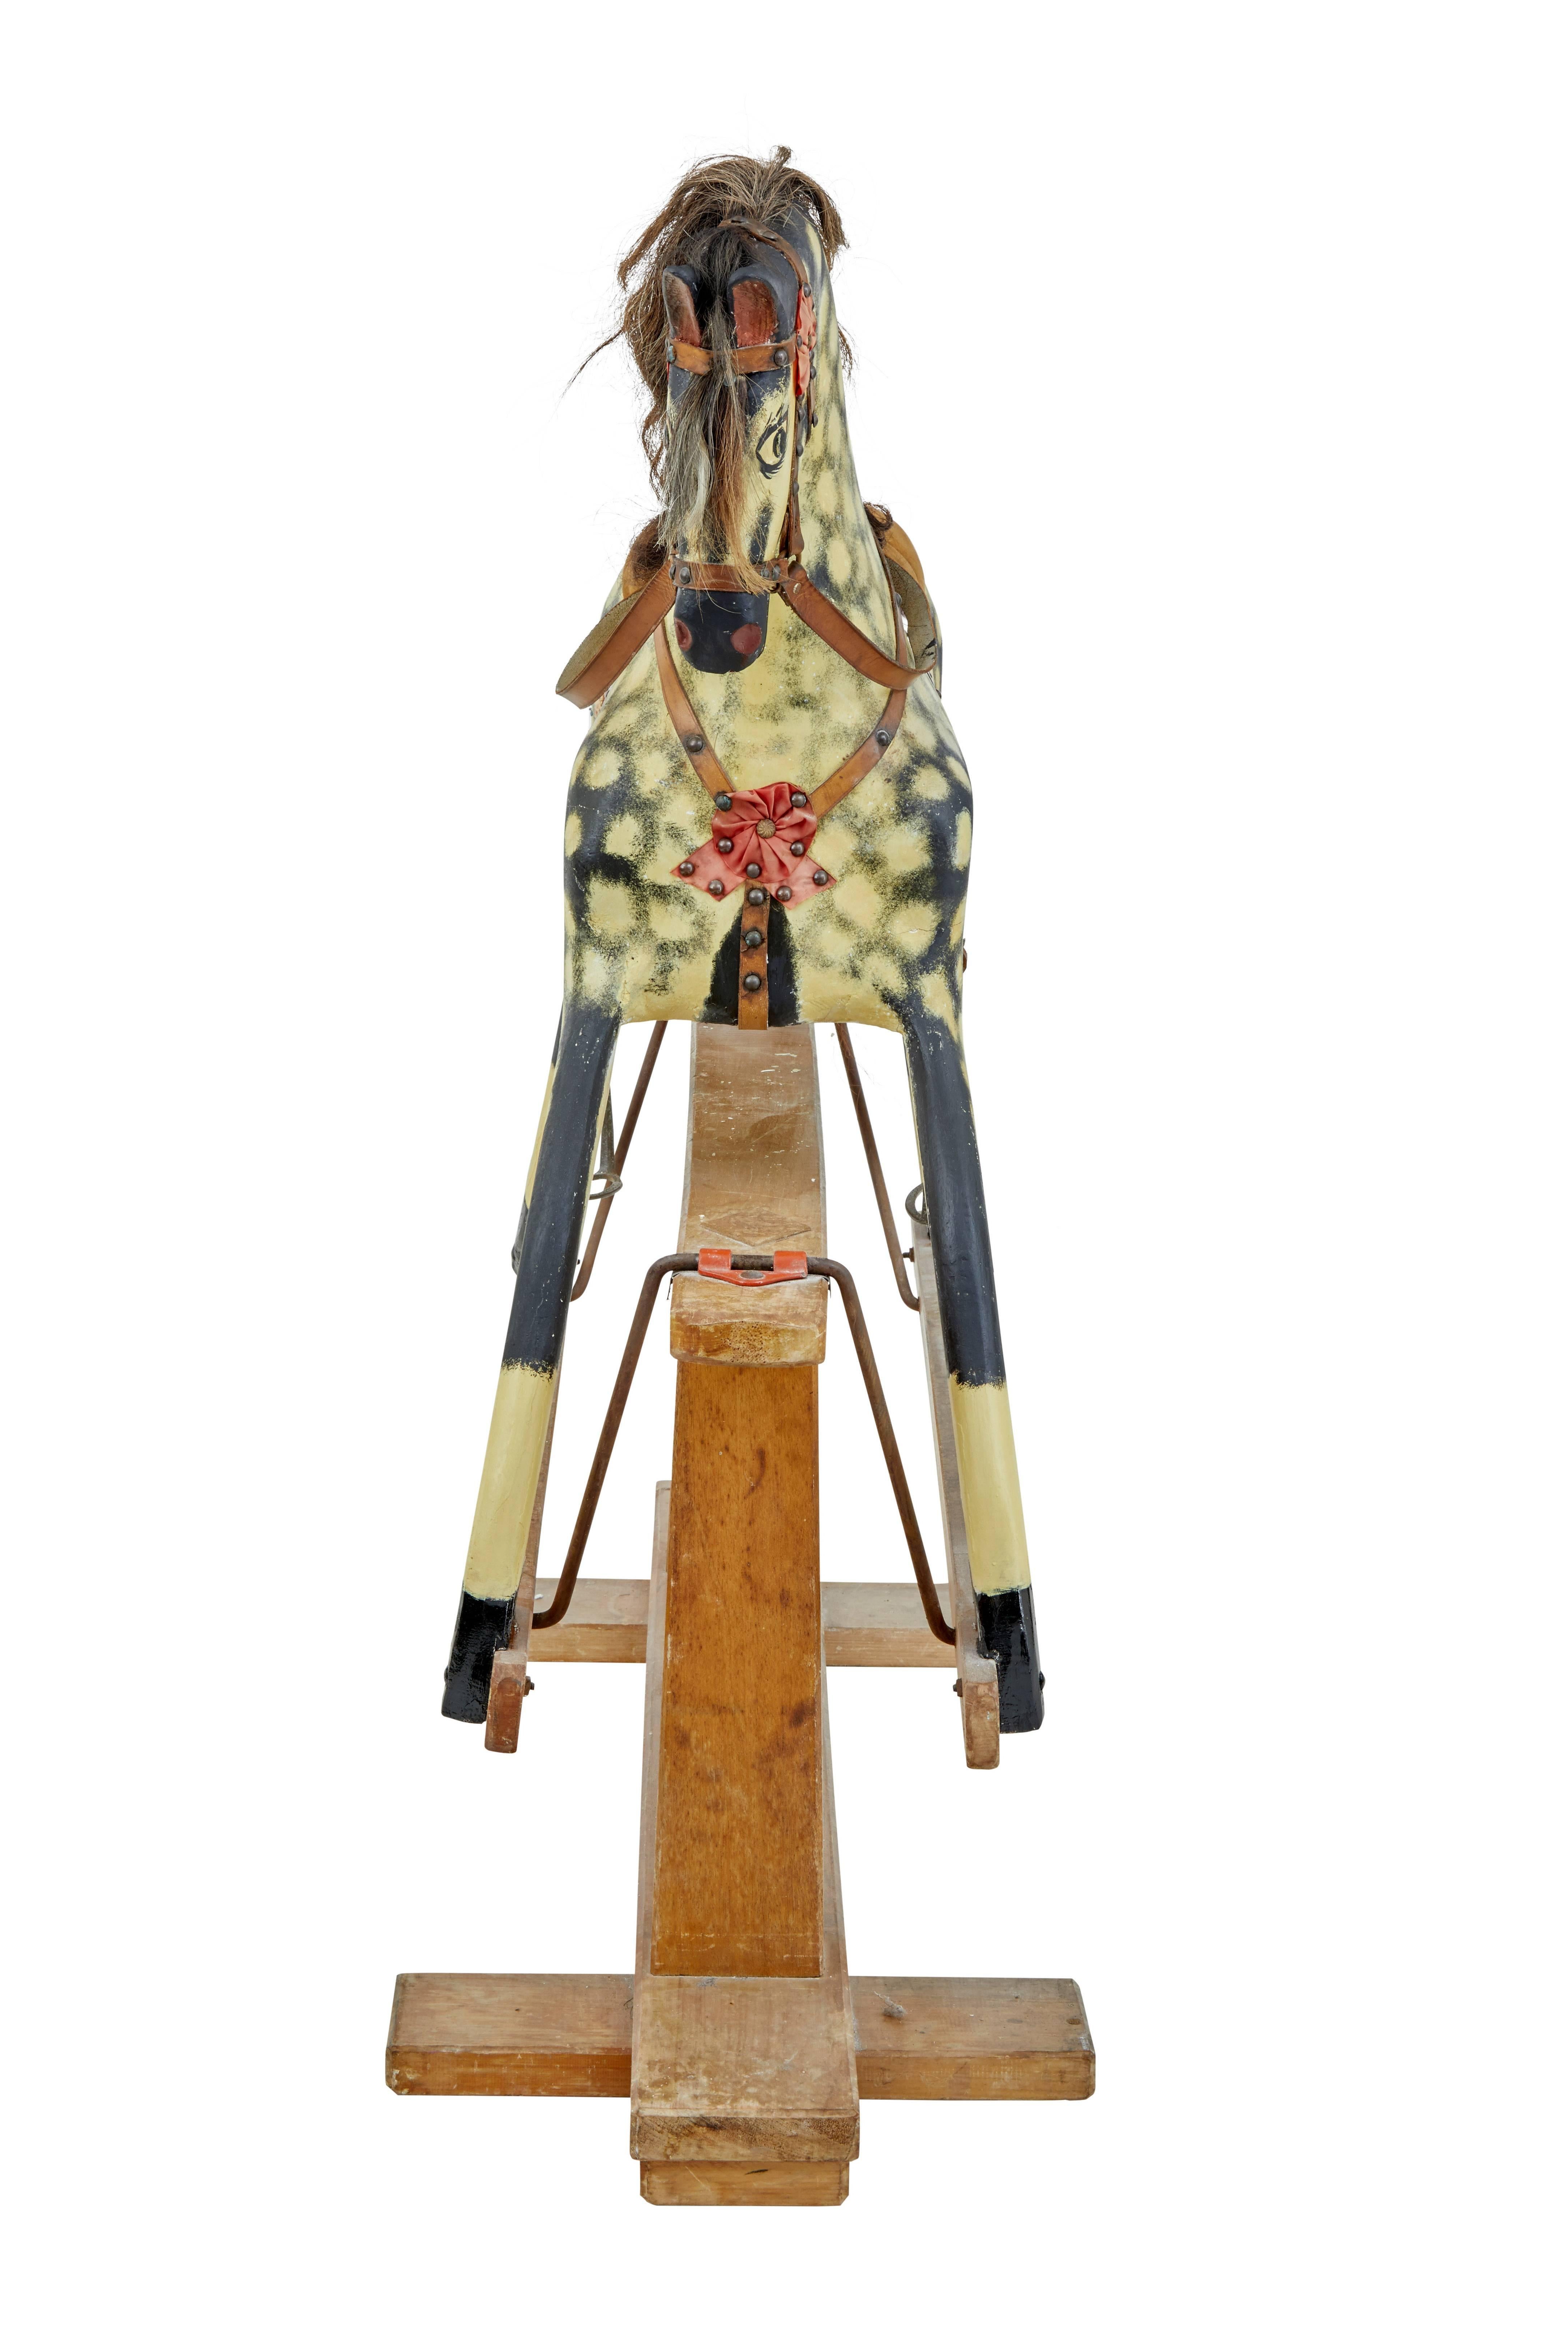 Here we present a beautiful wooden rocking horse by Collinson of Liverpool, circa 1890.

Painted dapple grey horse with real horse hair mane and tail.

Fitted on oak safety stand.

The large proportions of this model makes it ideal for both